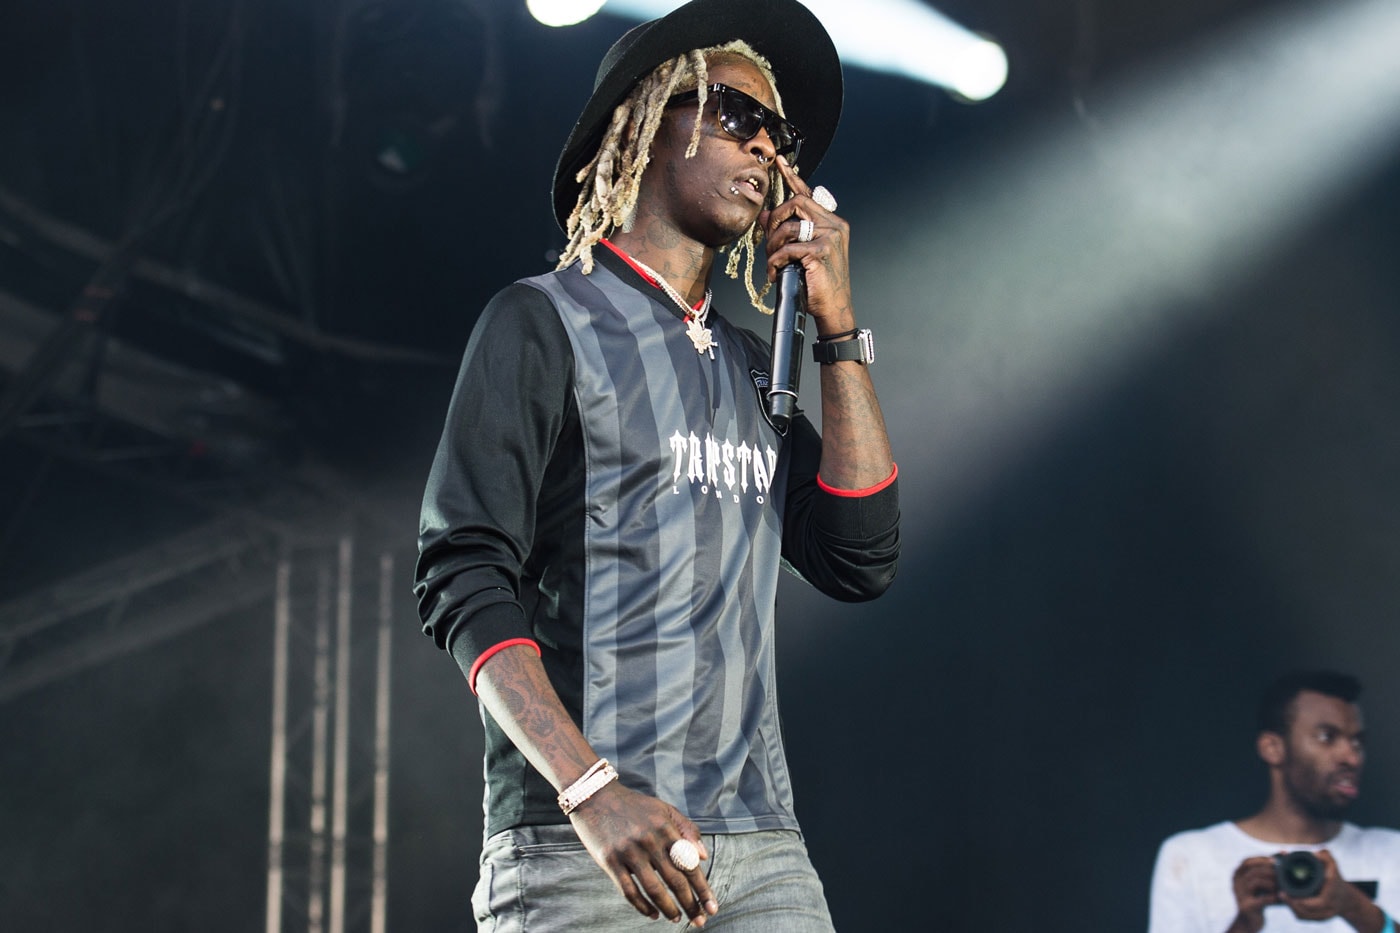 'DAZED' Explores the Eccentric World of Young Thug